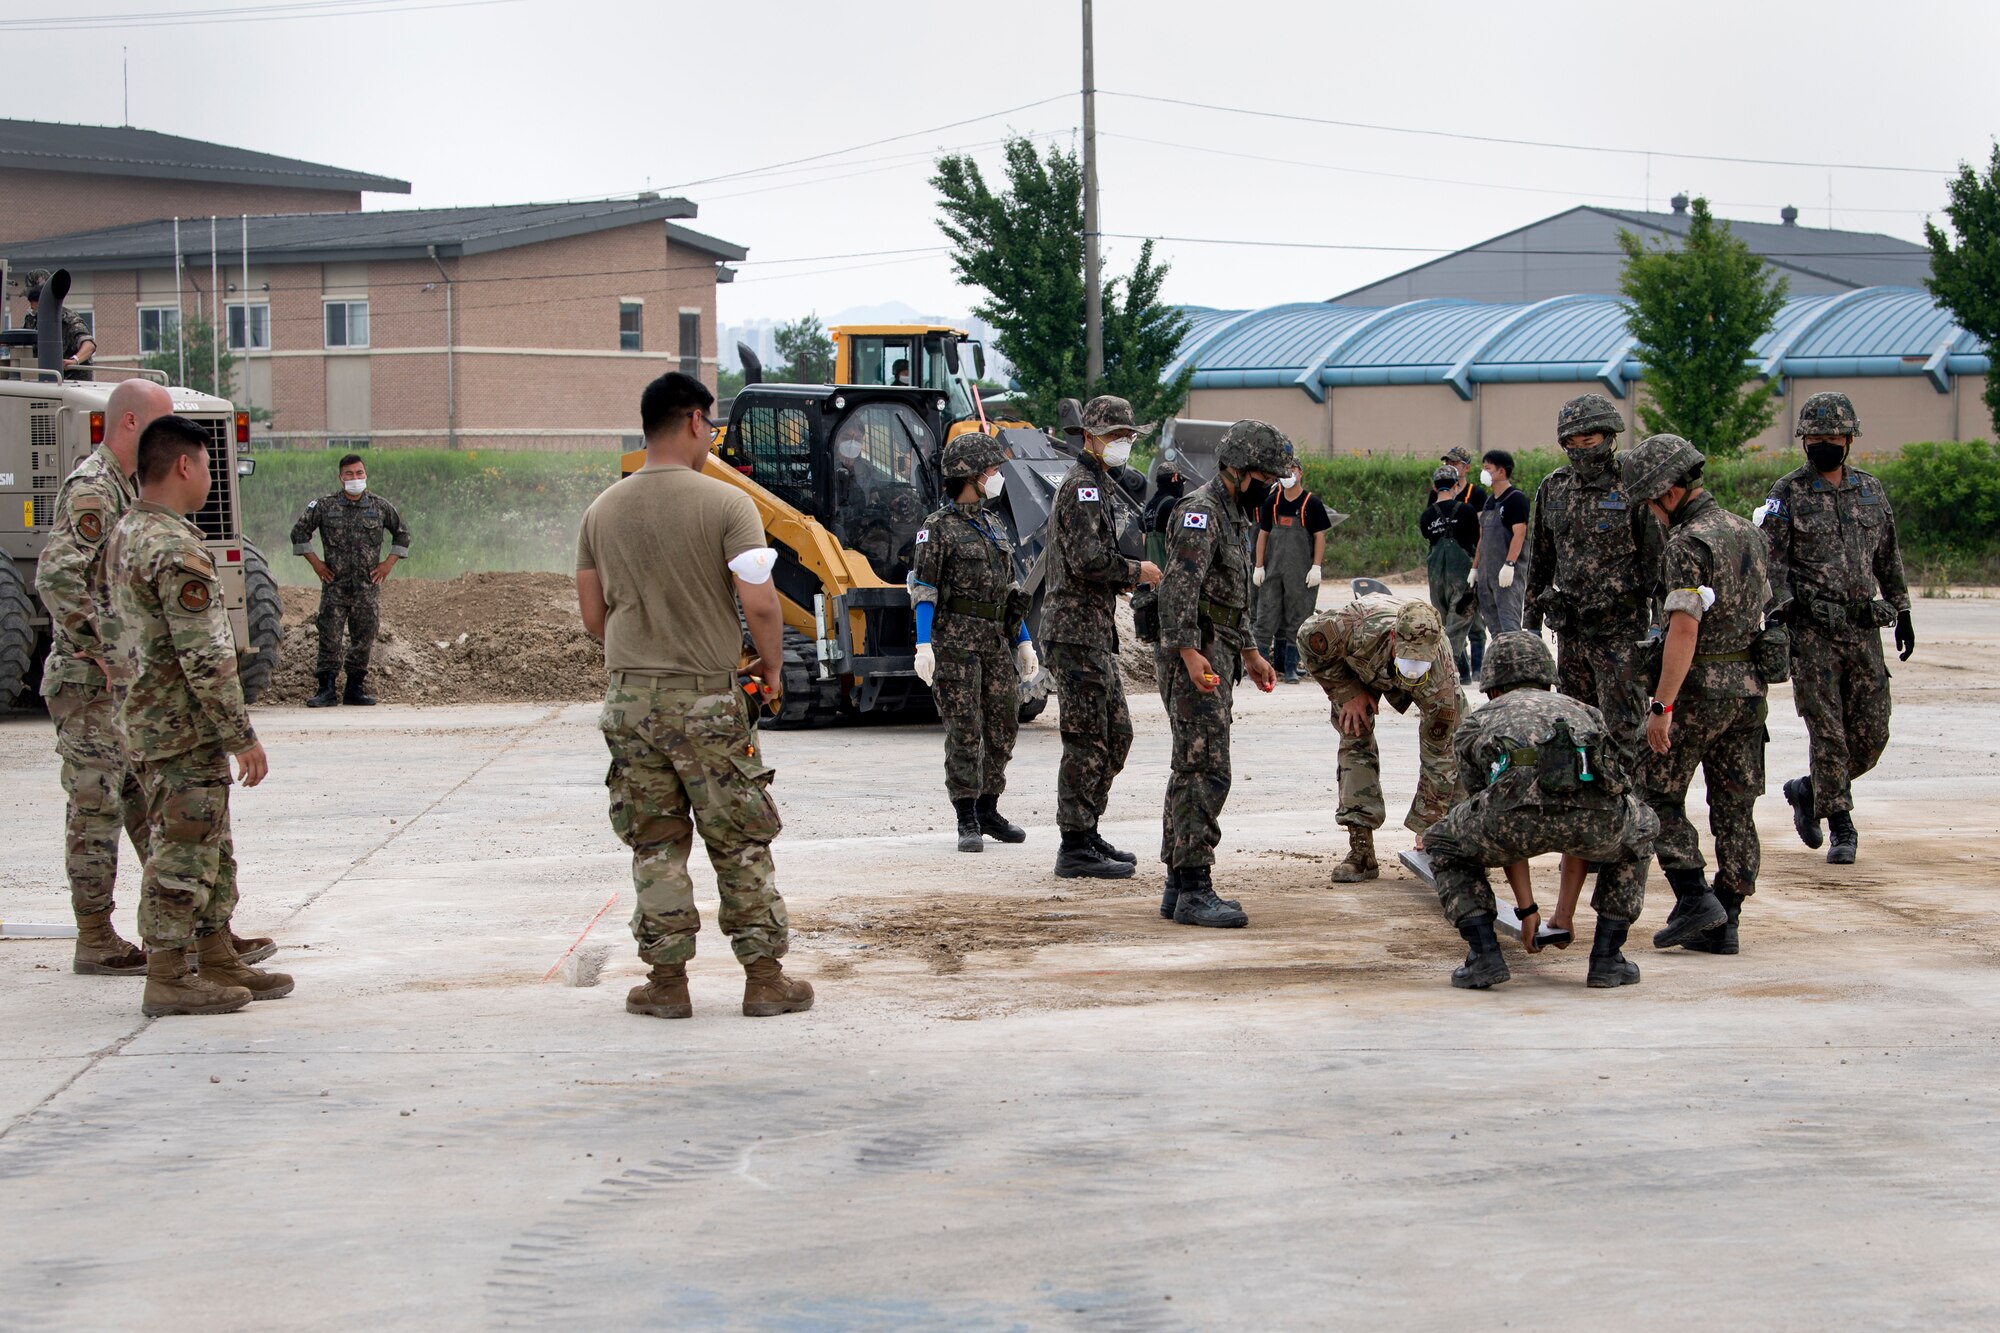 Members assigned to various sections of the 35th Civil Engineer Squadron from Misawa Air Base, Japan, and members of the Republic of Korea Air Force, mark an area of cement to be repaired during a bilateral training scenario at Suwon Air Base, Republic of Korea, July 6, 2022.